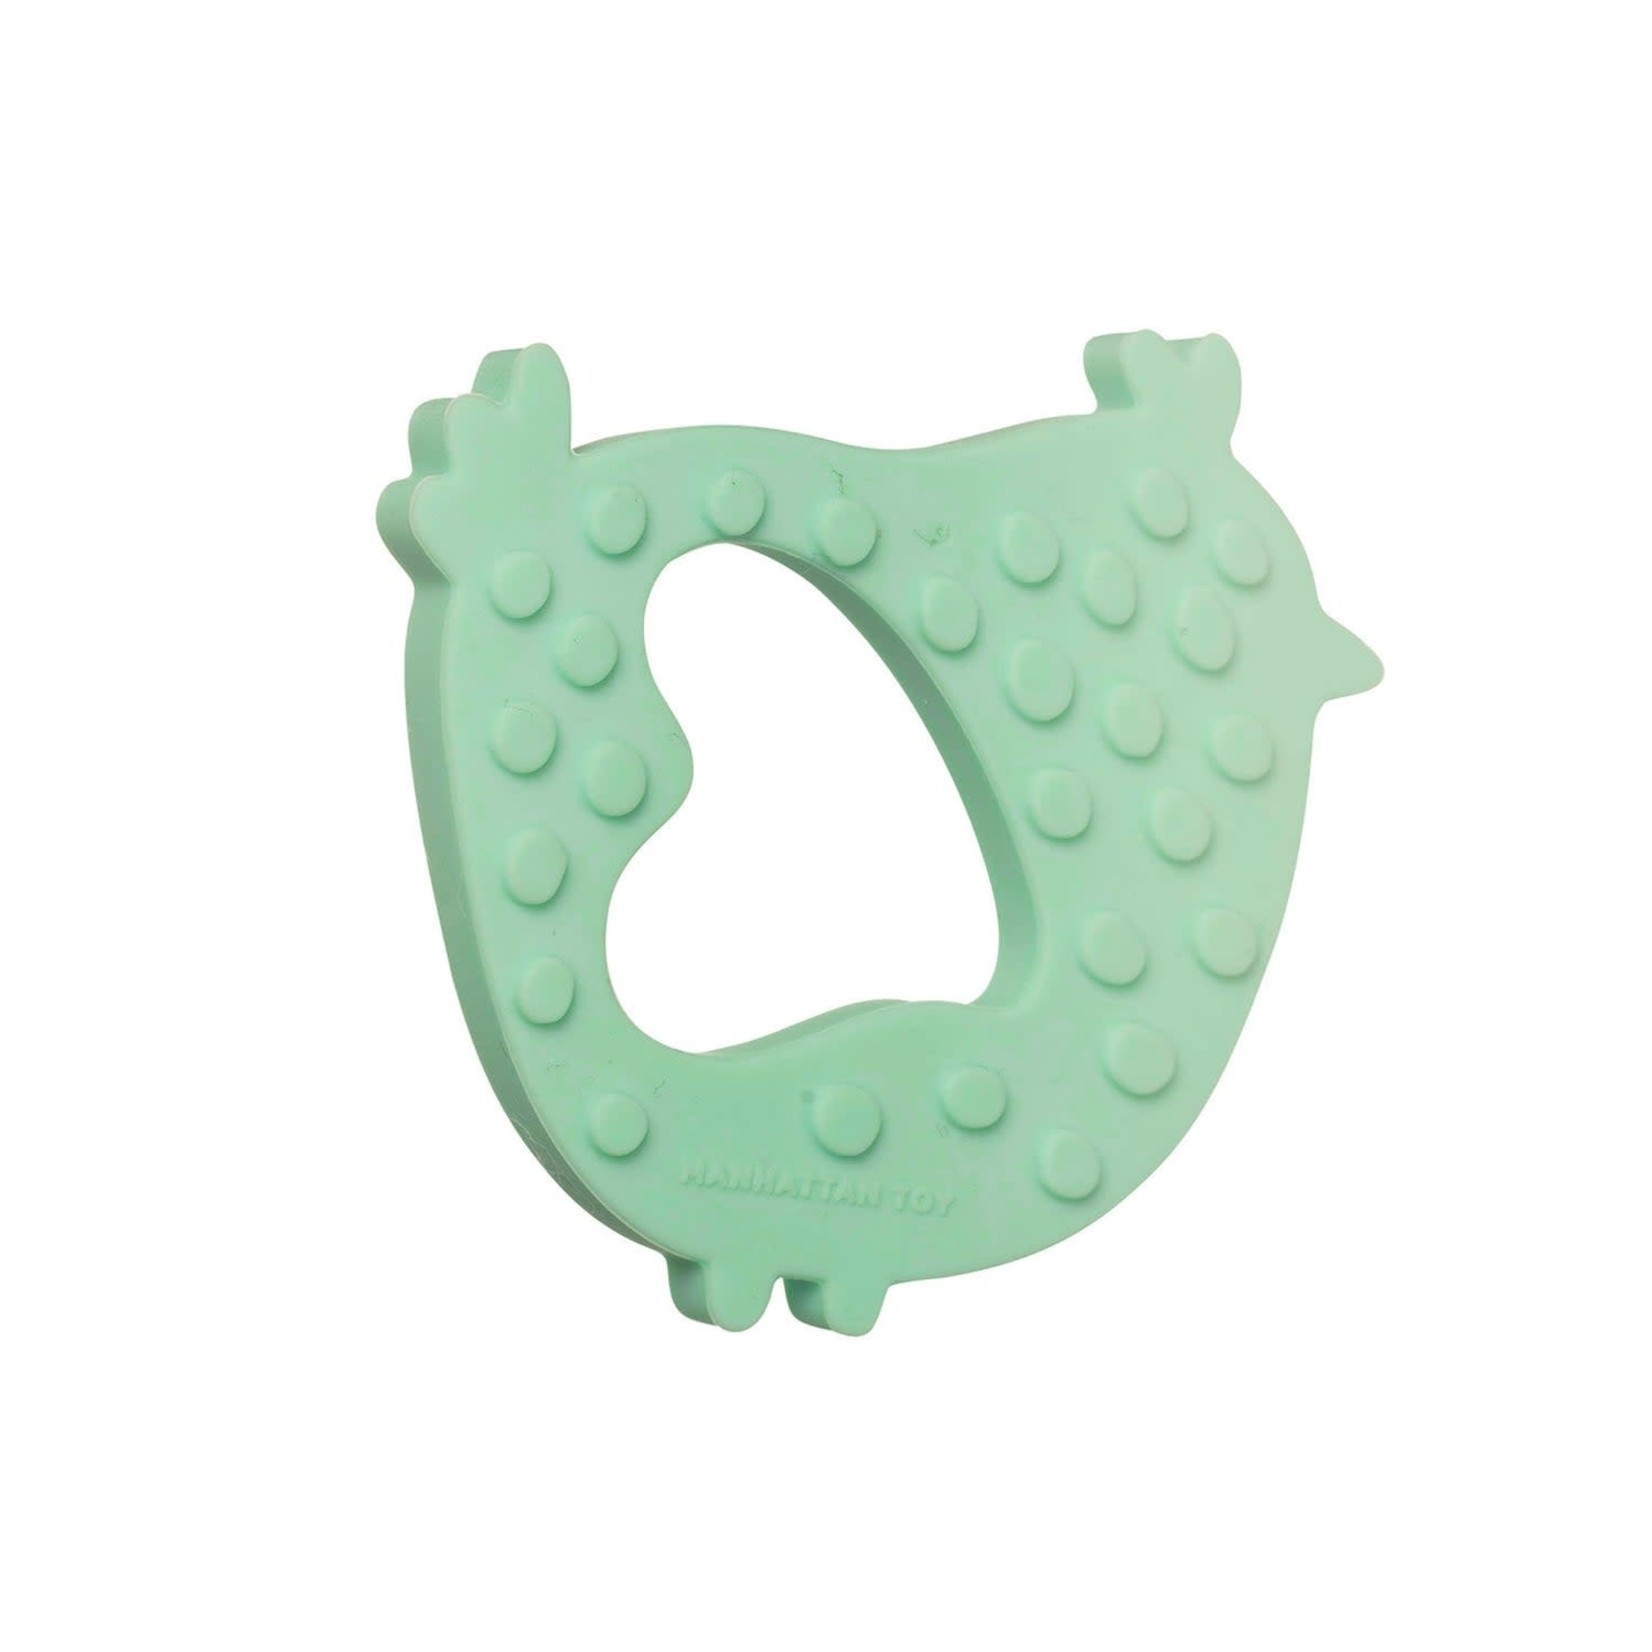 Manhattan Toy Silicone Teether Chick